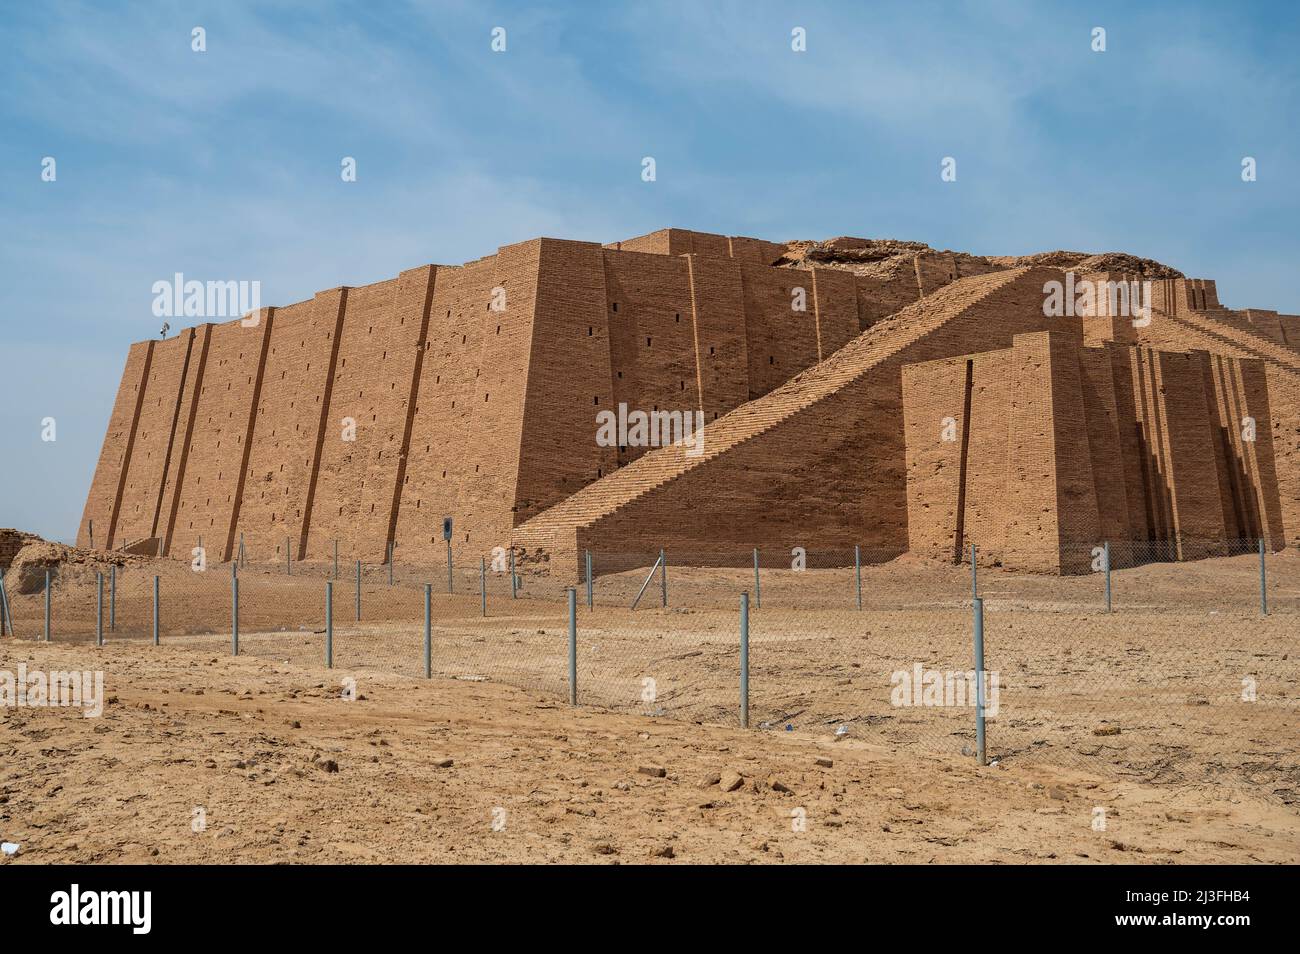 Ziggurat of Ur is a Neo-Sumerian ziggurat on the site of the ancient city of Ur near Nasiriyah, in present-day Dhi Qar Province, Iraq. The structure w Stock Photo